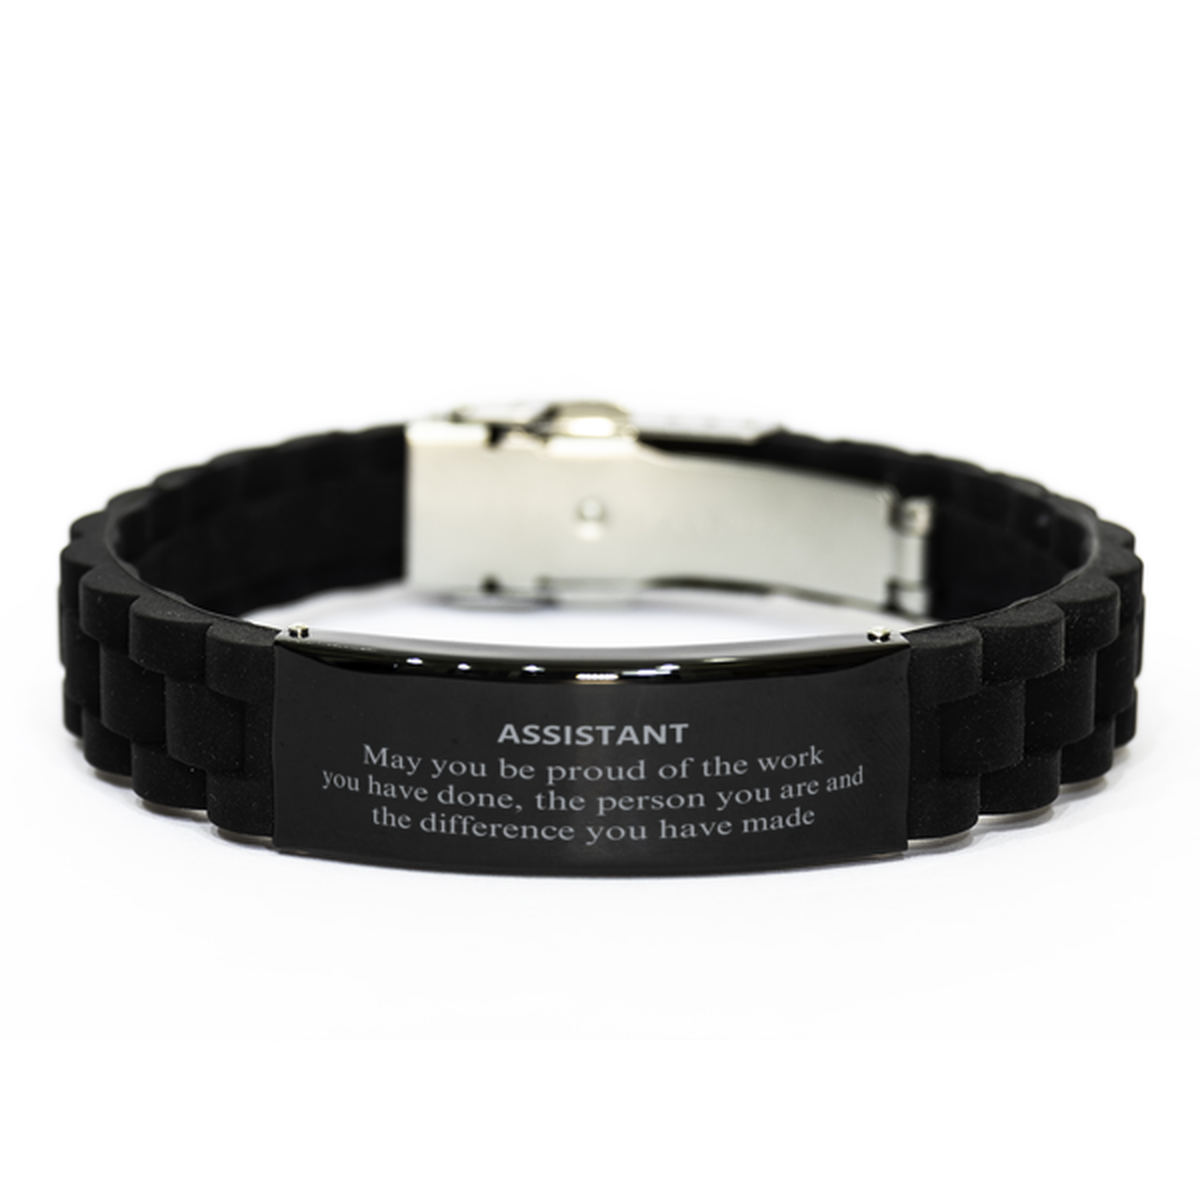 Assistant May you be proud of the work you have done, Retirement Assistant Black Glidelock Clasp Bracelet for Colleague Appreciation Gifts Amazing for Assistant